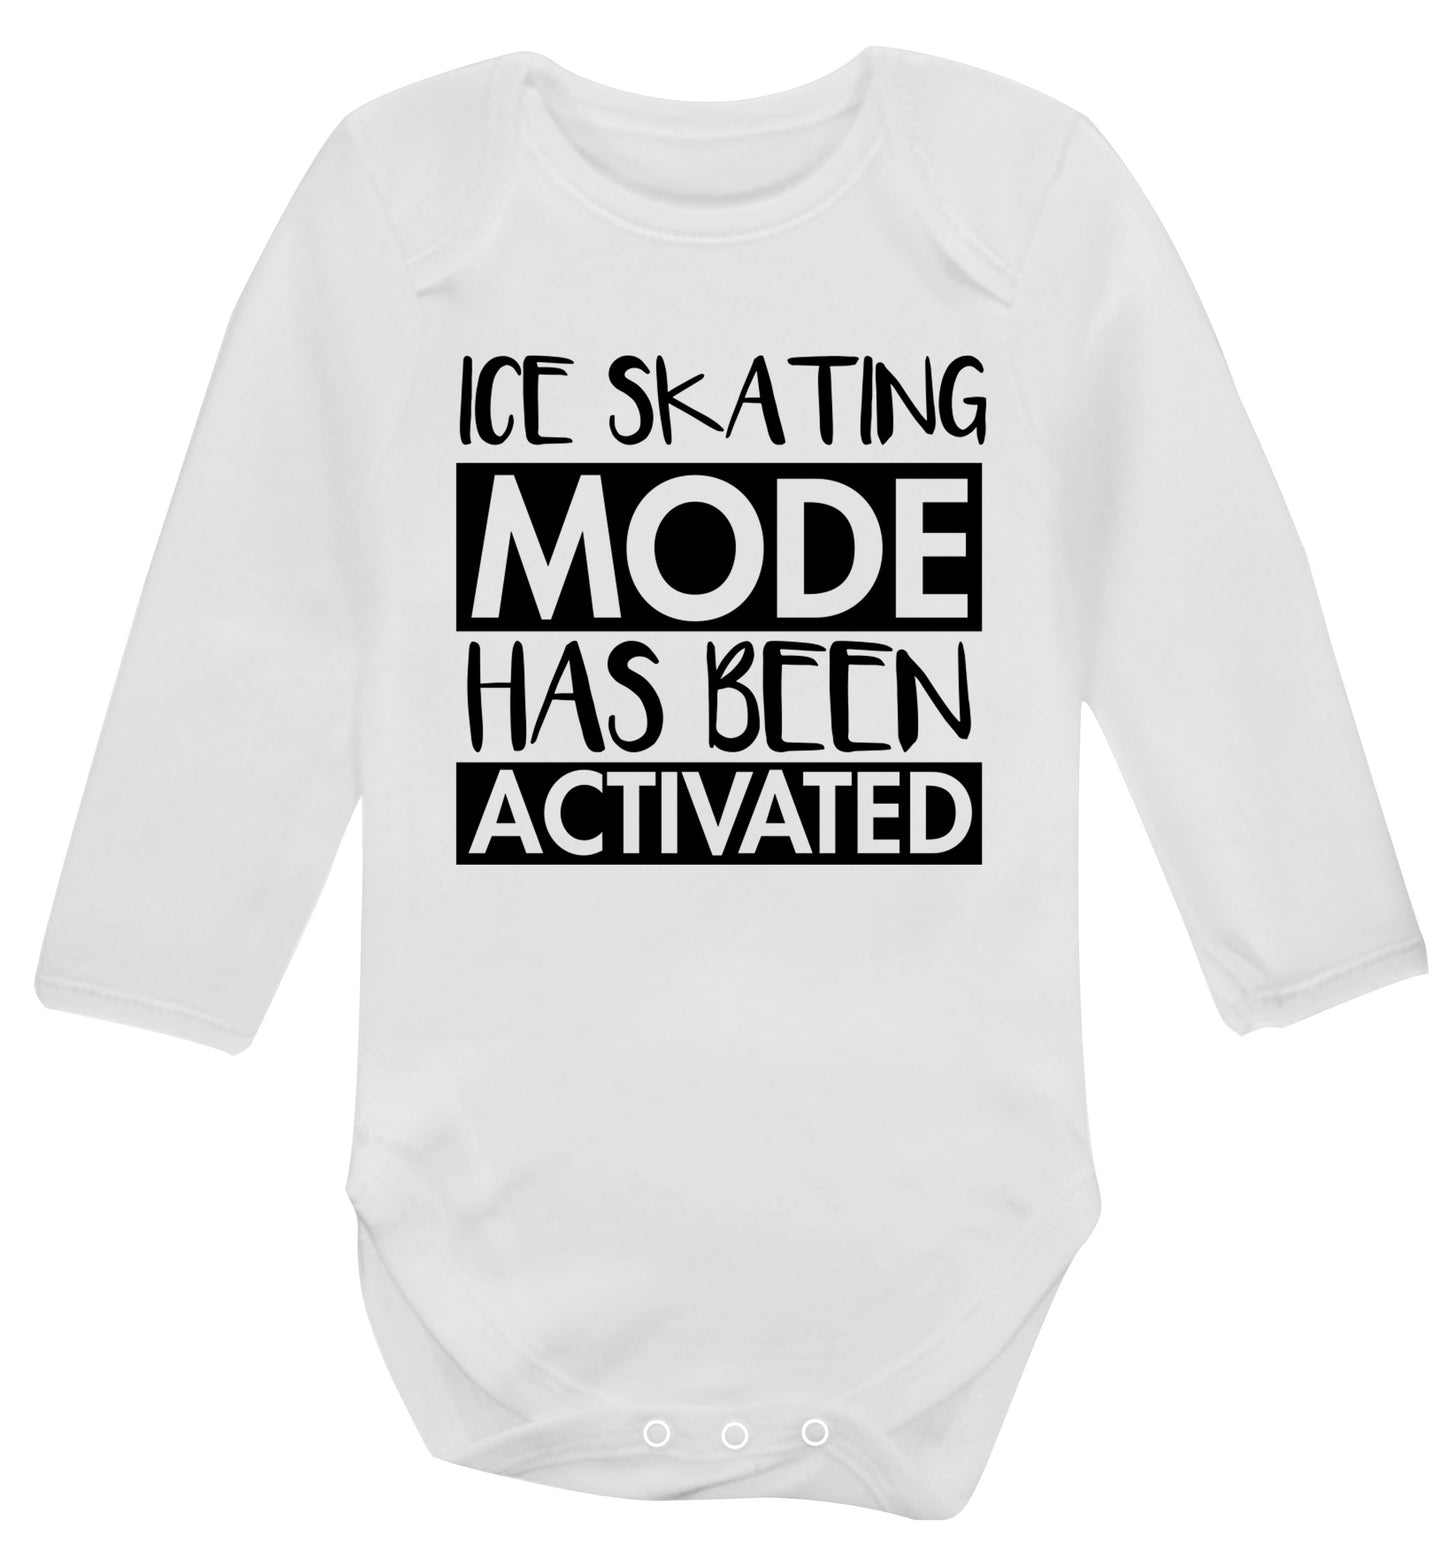 Ice skating mode activated Baby Vest long sleeved white 6-12 months